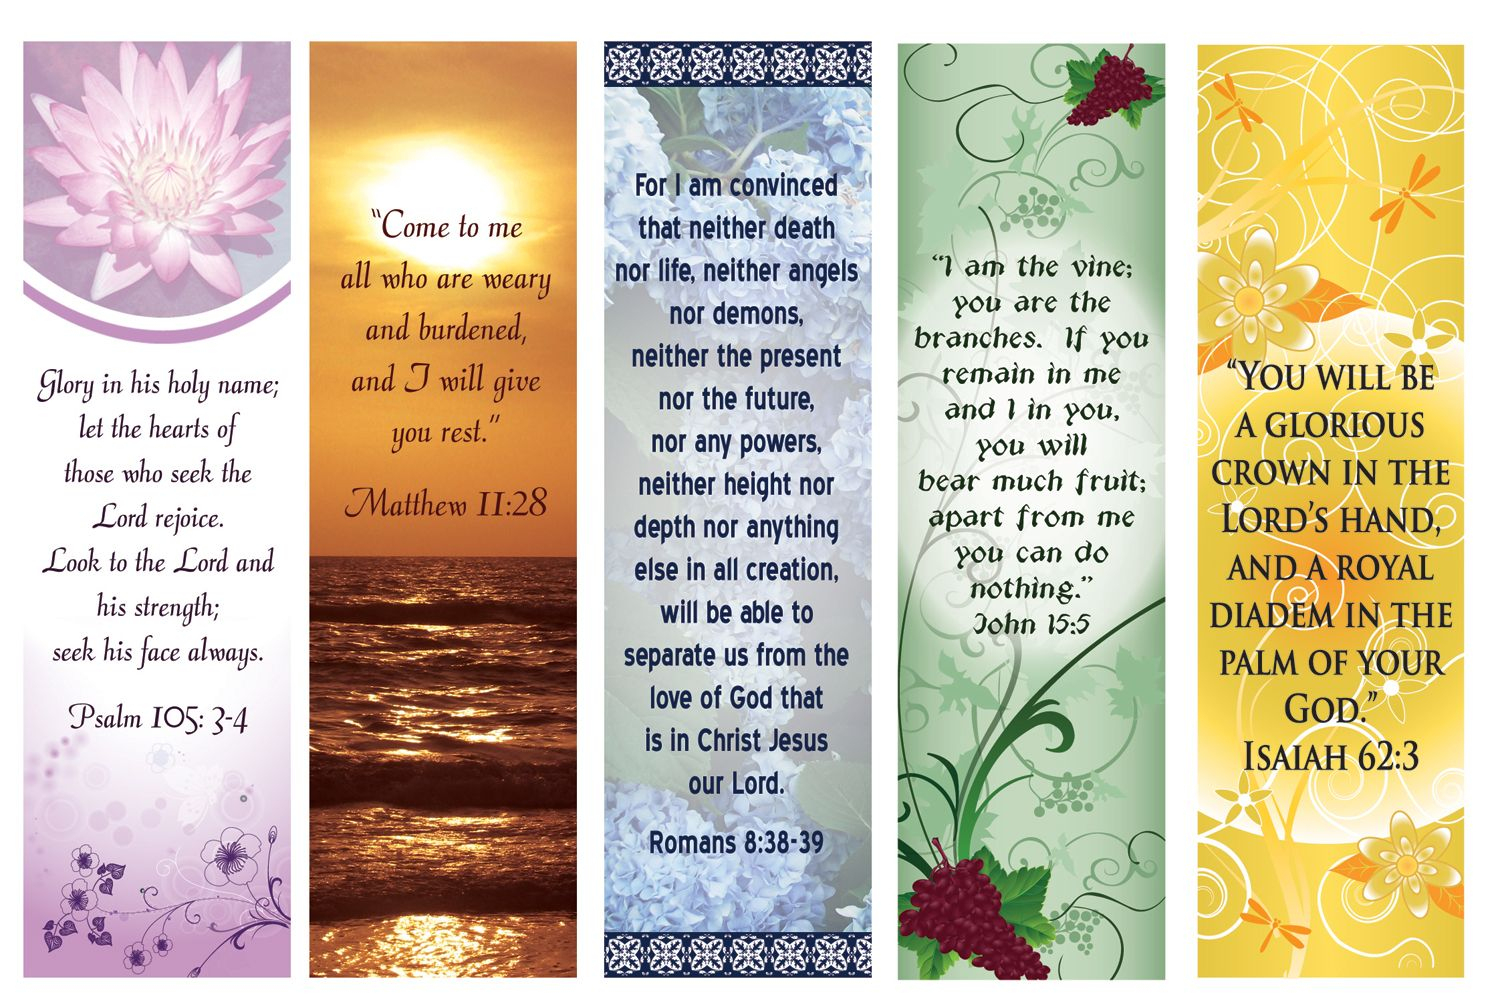 Free Printable Bookmarks With Bible Verses | Bookmarks | Pinterest - Free Printable Bookmarks With Bible Verses